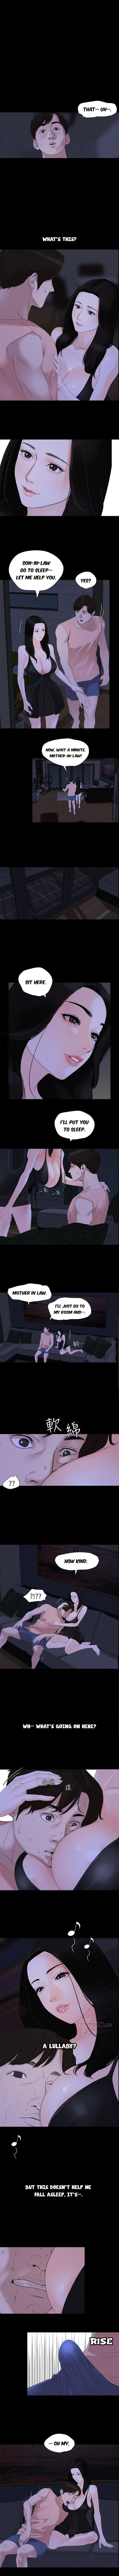 Don’t Be Like This! Son-In-Law - Chapter 5 Page 2